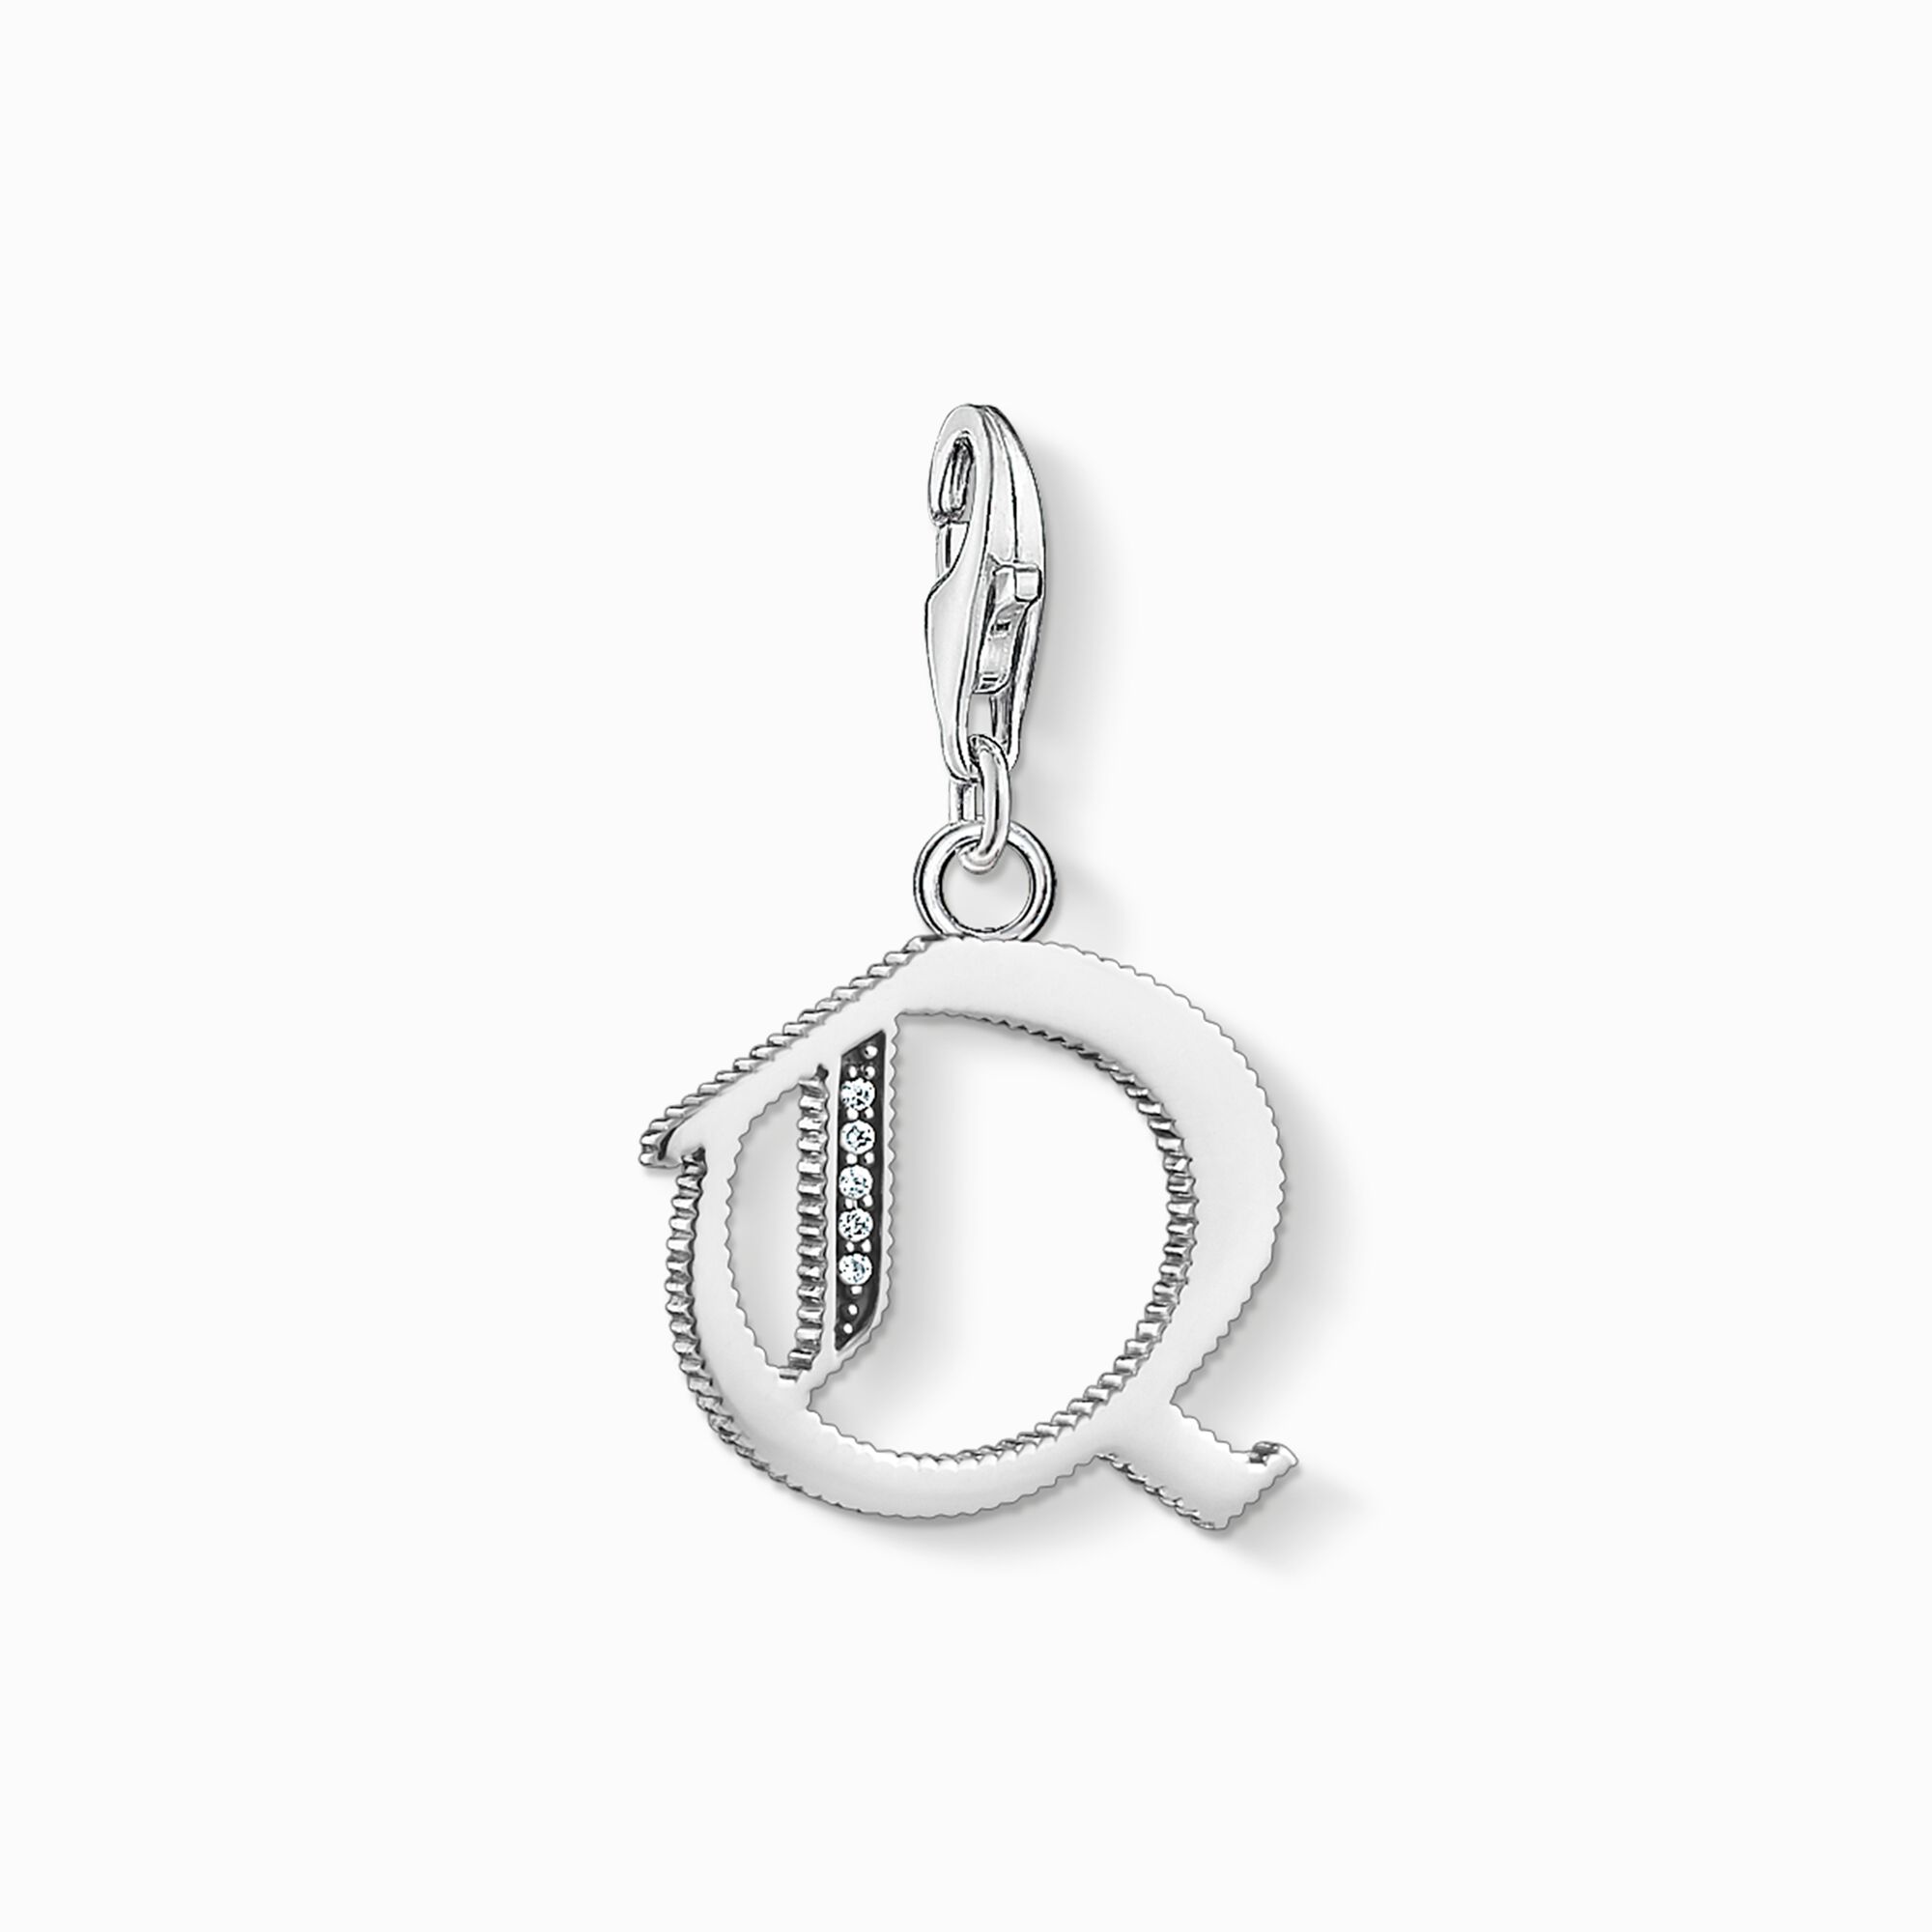 Charm pendant letter Q silver from the Charm Club collection in the THOMAS SABO online store